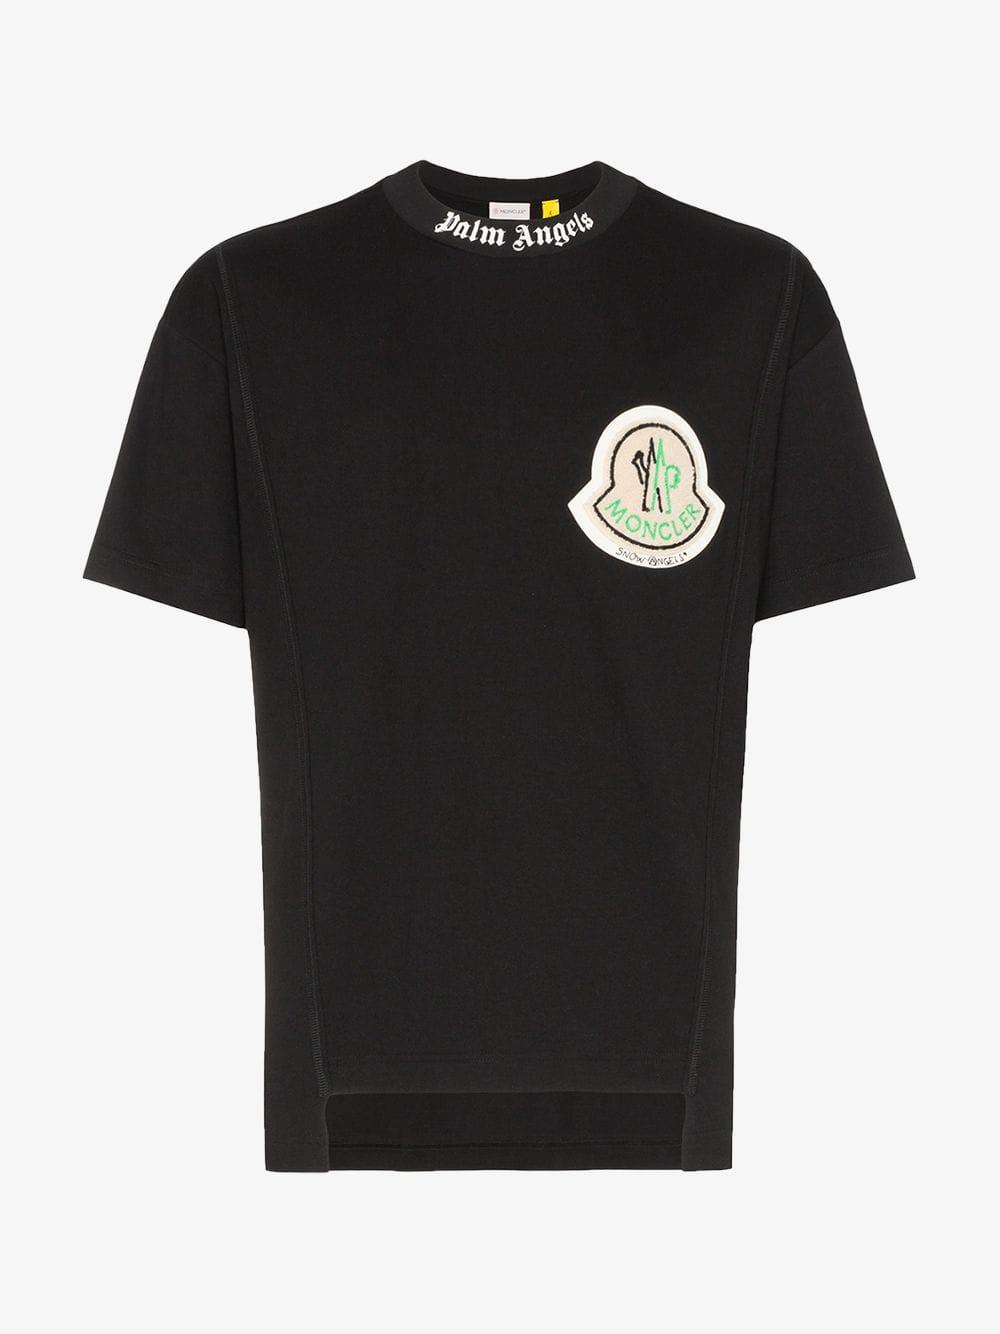 Moncler Genius X Palm Angels Mind Control T-shirt in Black for Men - Lyst